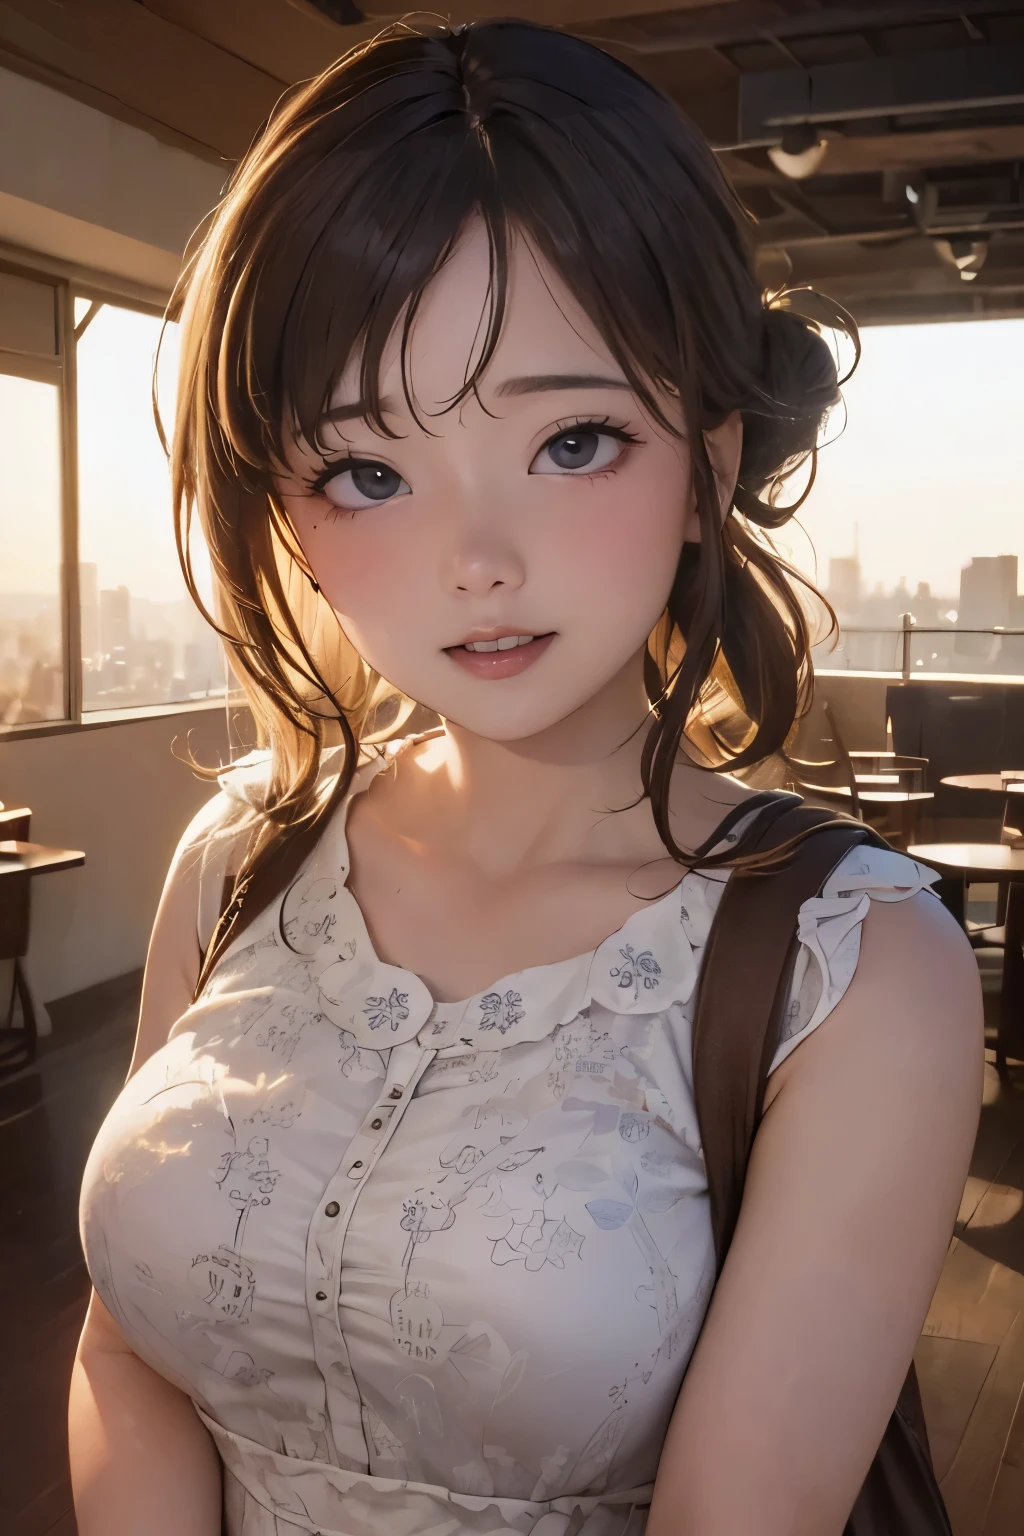 high-definition image, (((round face))), eyes realistic sizing, realistic skin, drooping eyes, smiling, ((various patterned feminine casual long dress)), (strong sunlight, old fashion), skyscrapers, hair up, 